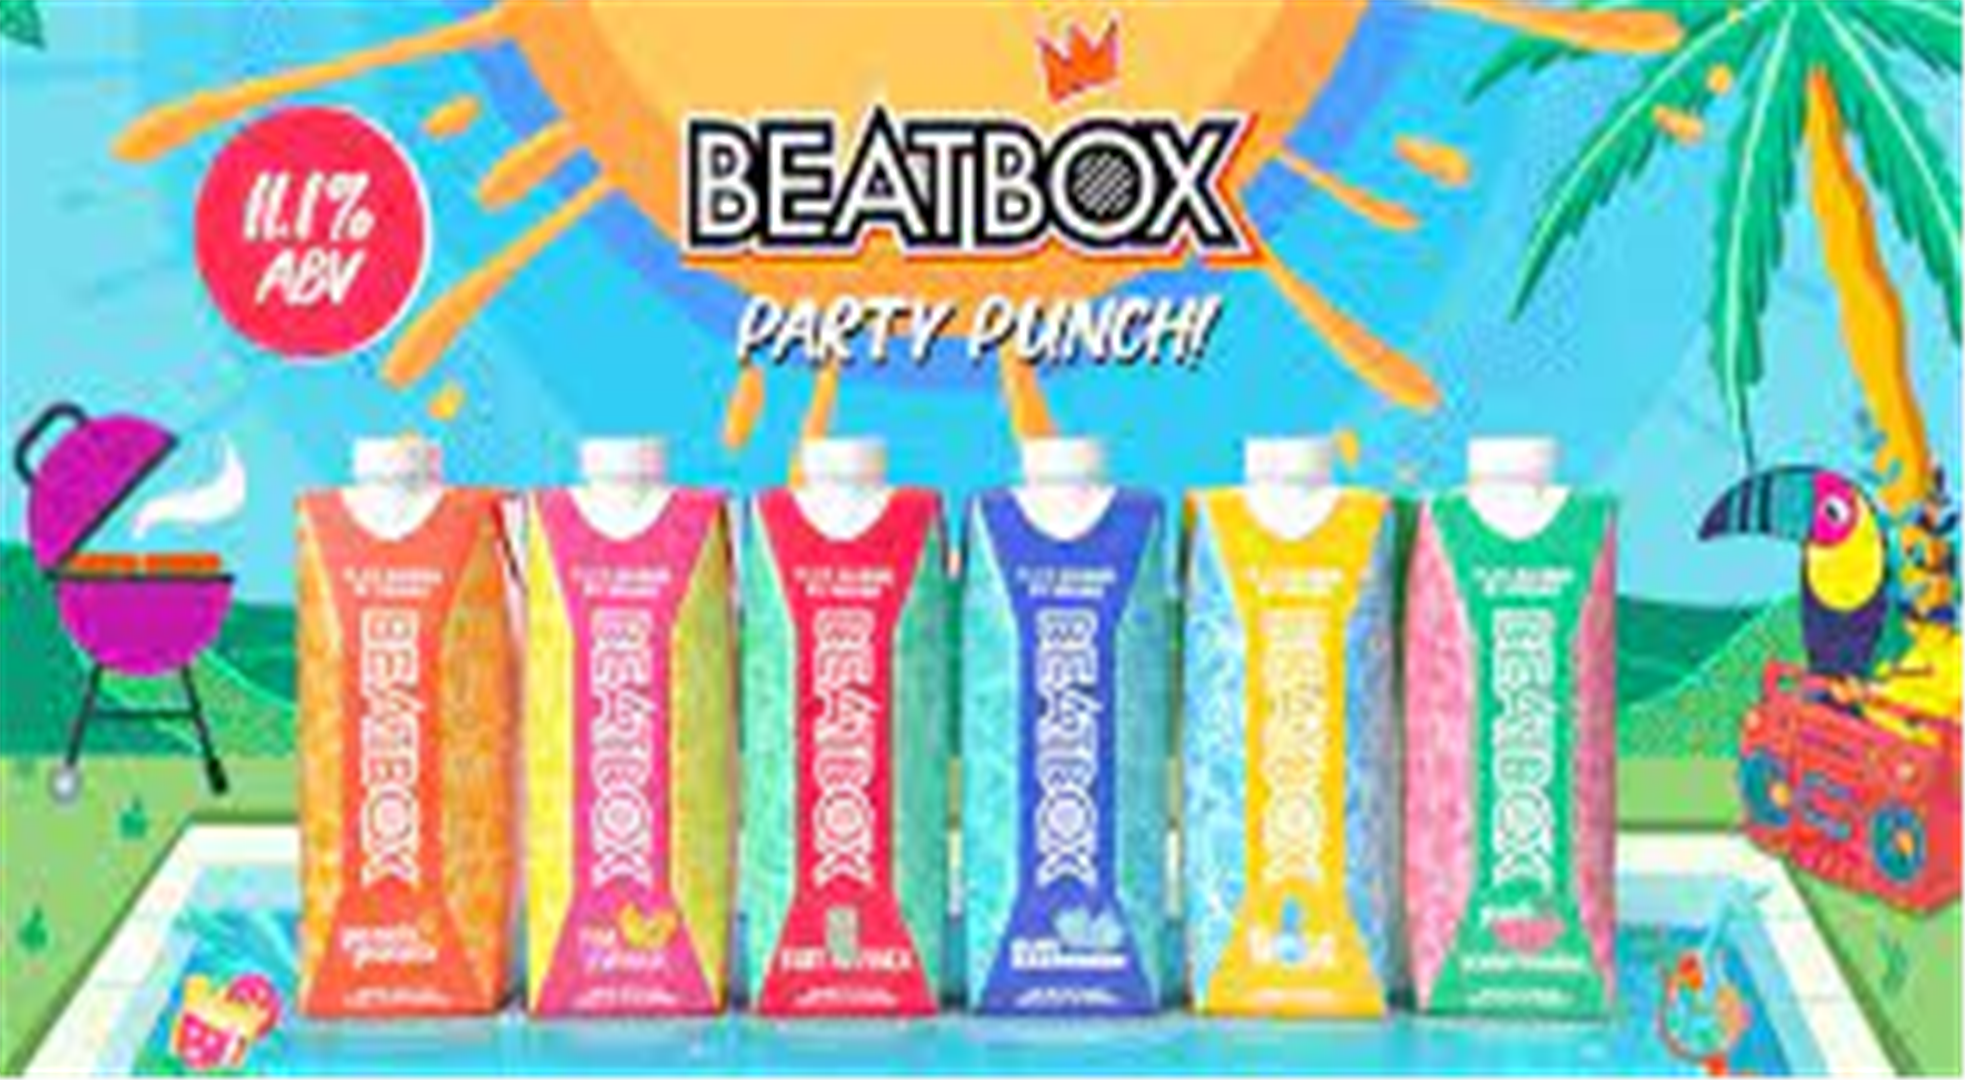 Beat Box Cocktails $4.99 each or 2 FOR $8.00 